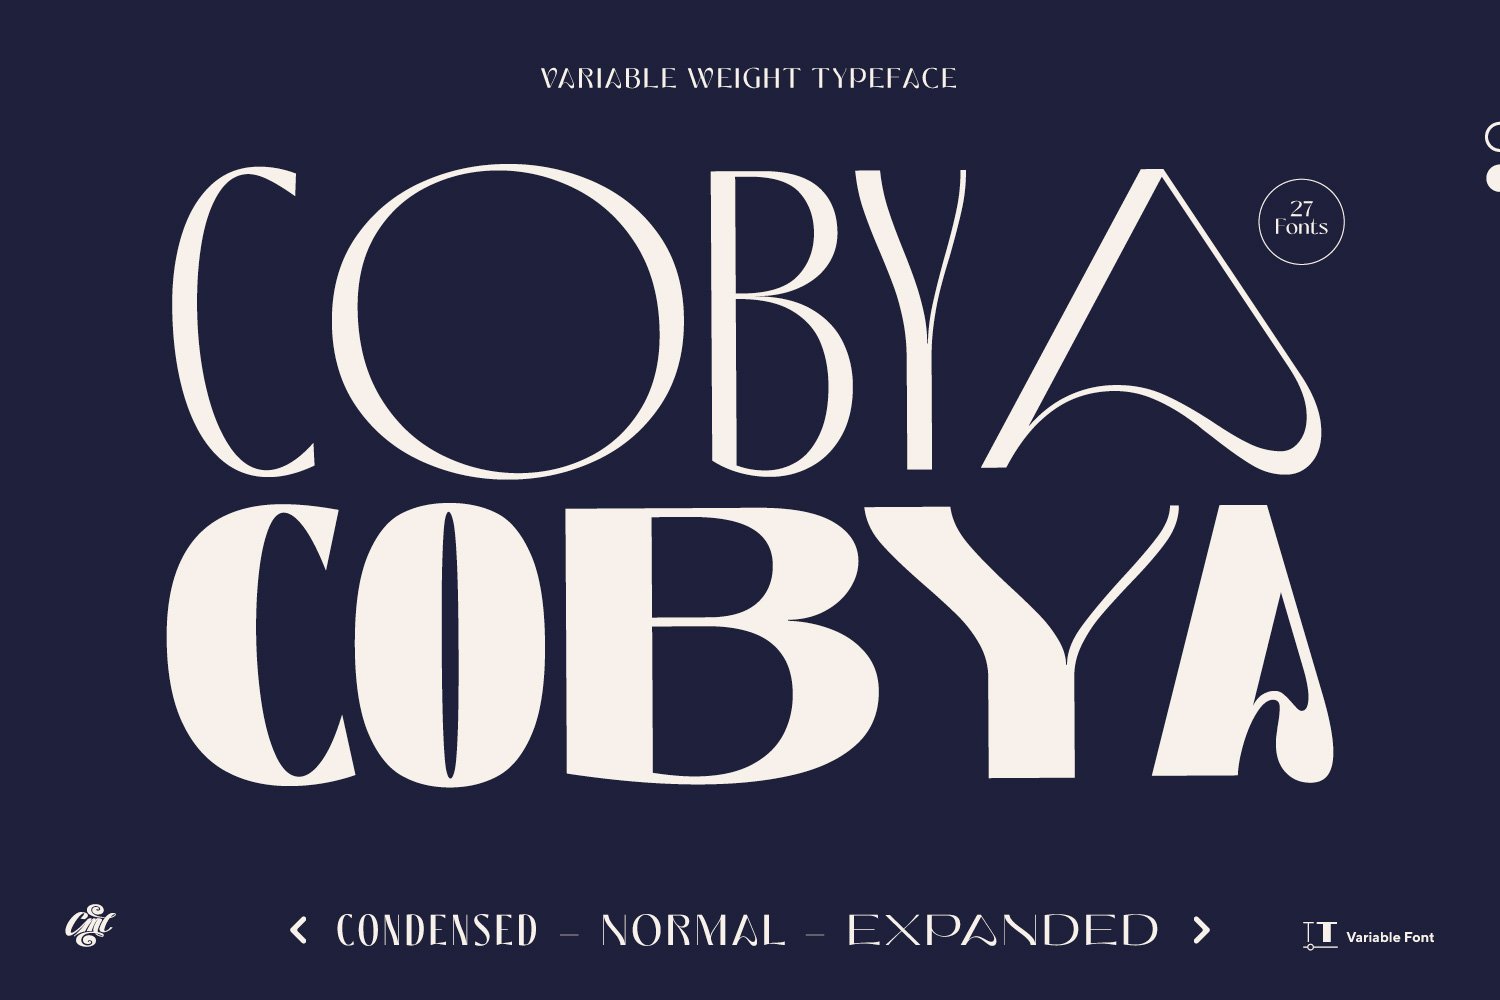 Cobya - Variable Weight Typeface cover image.